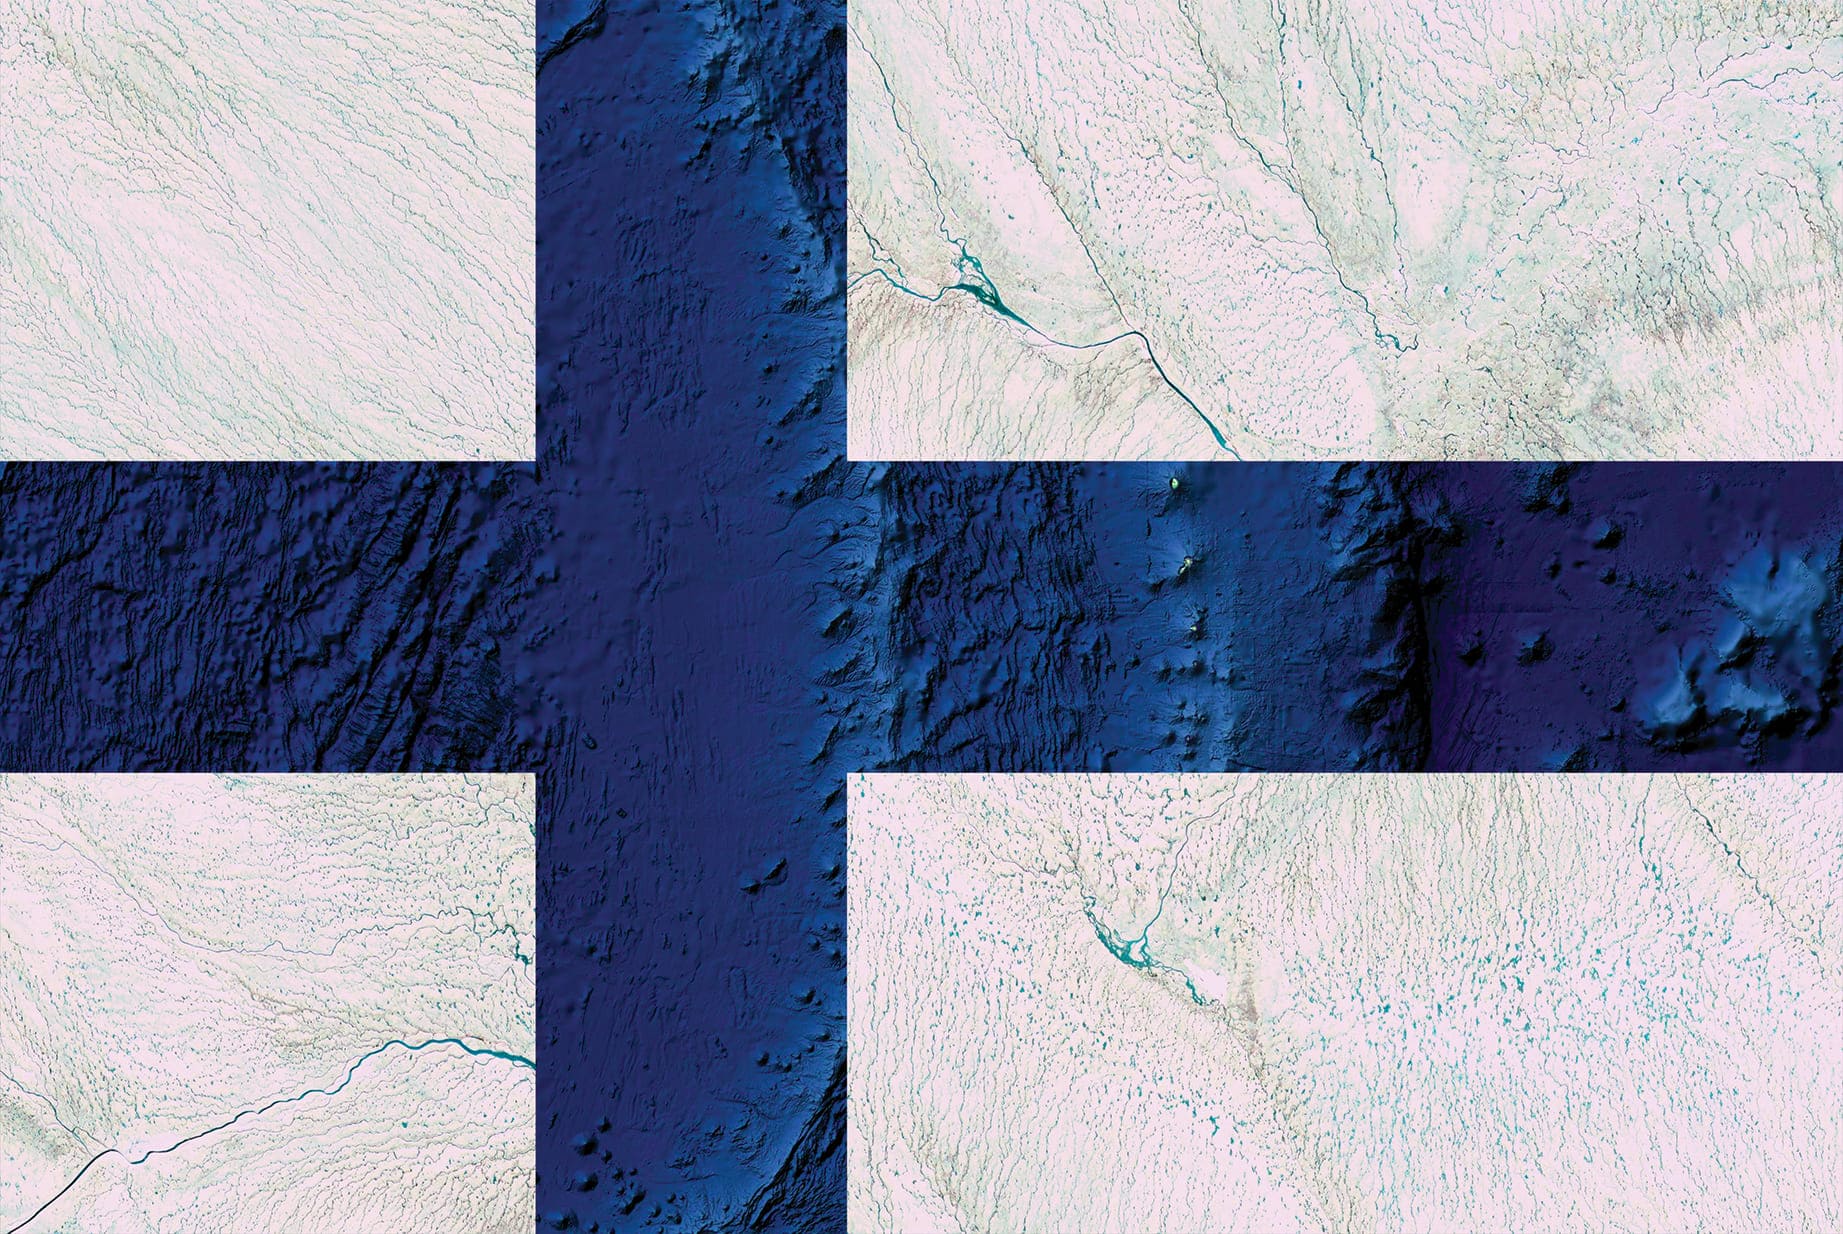 FINLAND EARTH FLAG, 2016, DIGITAL COLLAGE OF SATELLITE PHOTOGRAPHY FROM GREENLAND, OCEANIA, diasec print CM 67×100, edition of 9